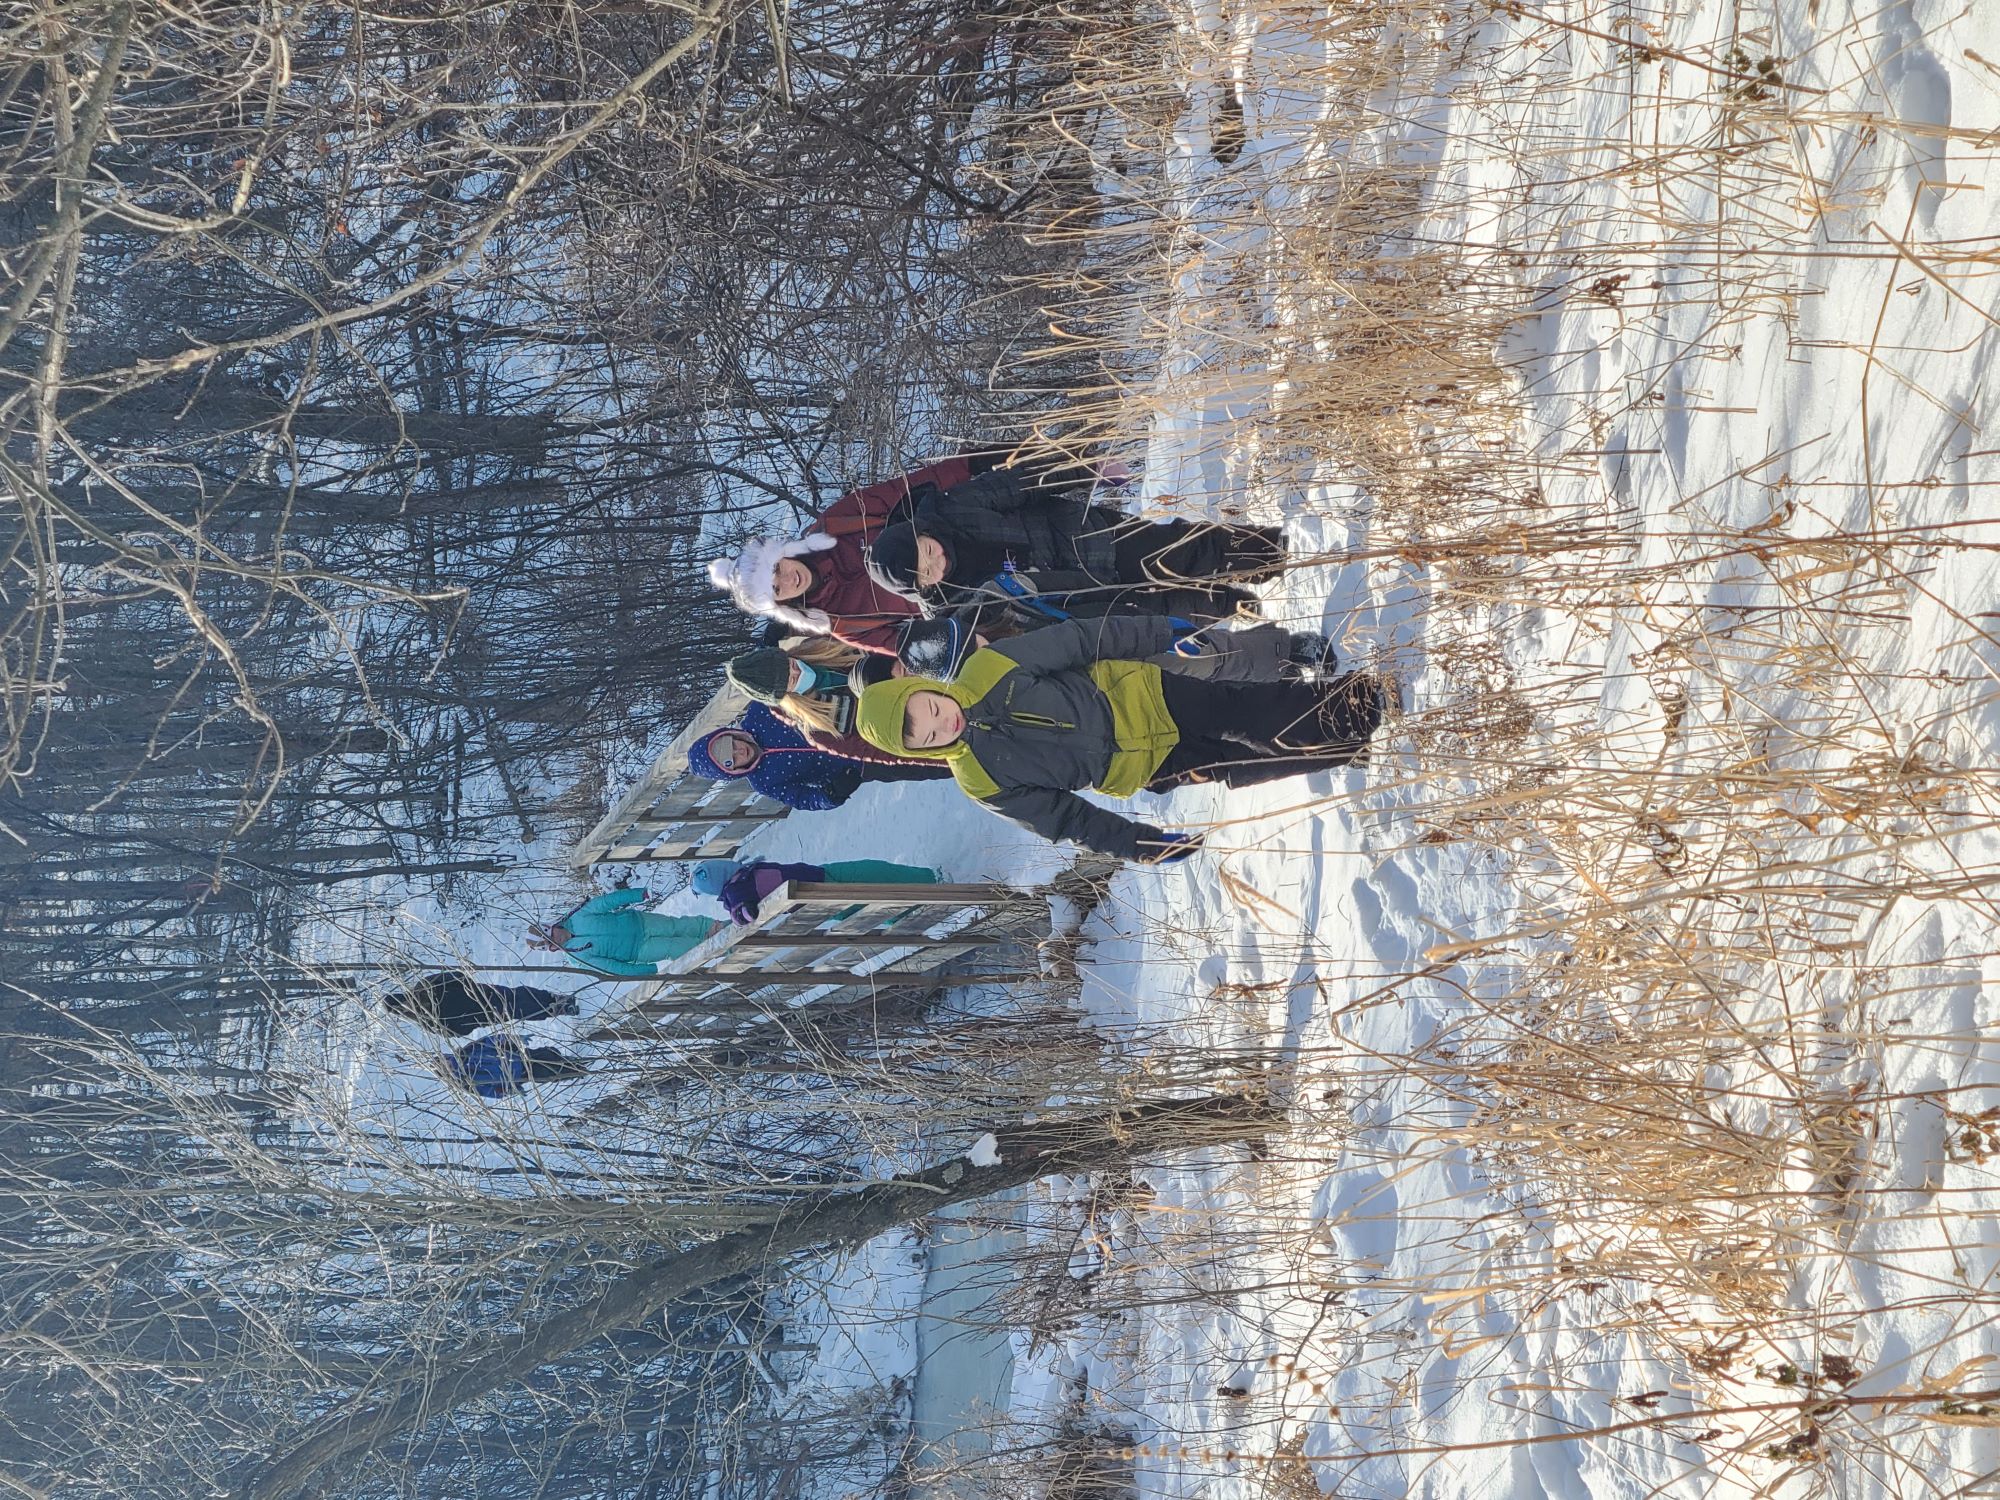 a small group of kids and adults bundled in winter gear hike across a wooden foot bridge through the Riveredge forest into the prairie